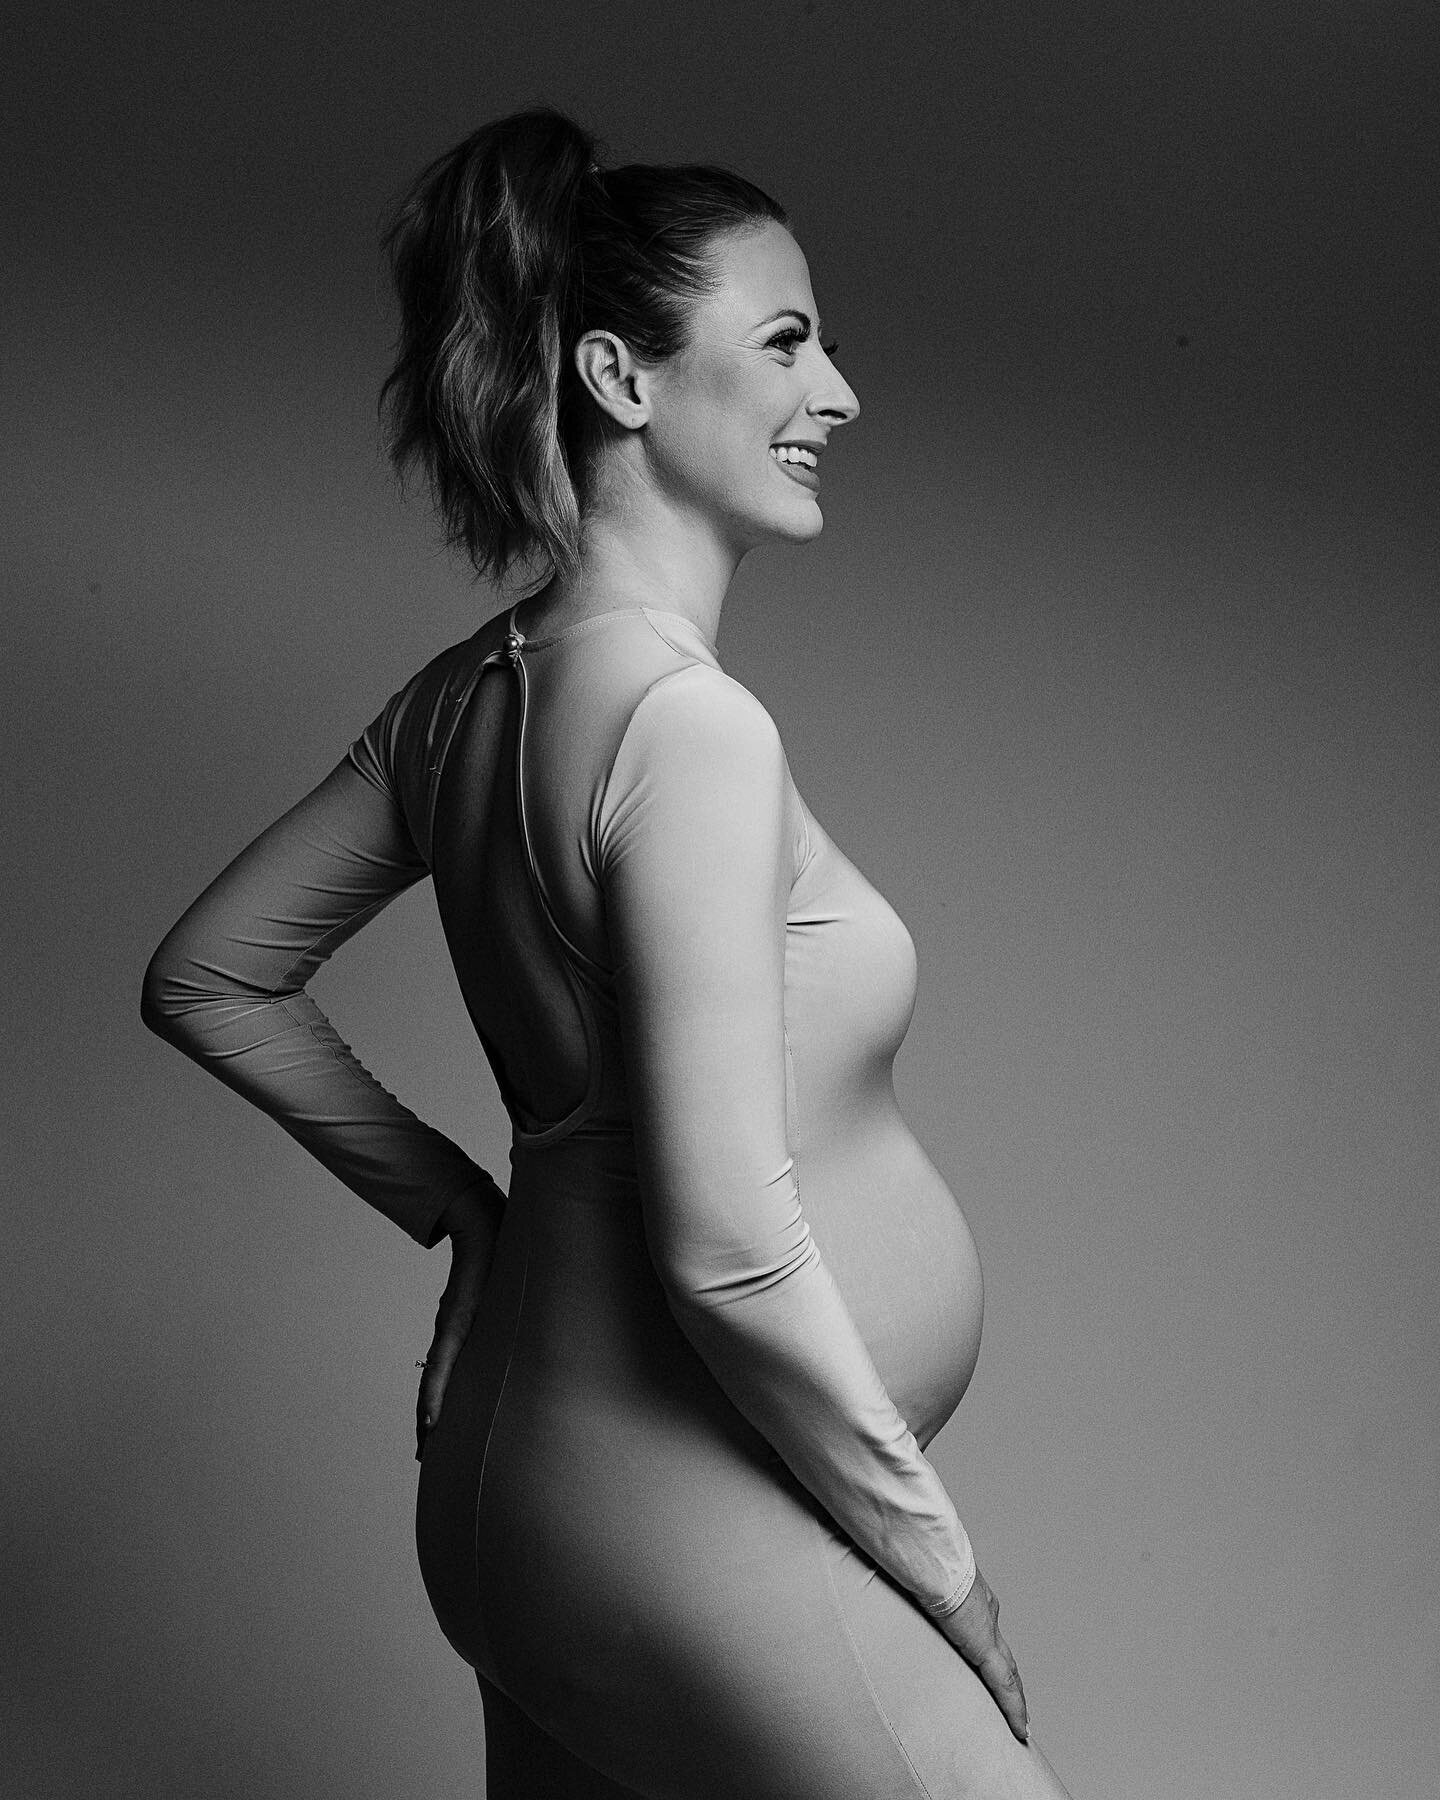 It won&rsquo;t be like this for long 🤰
MUA @sarahblackmua